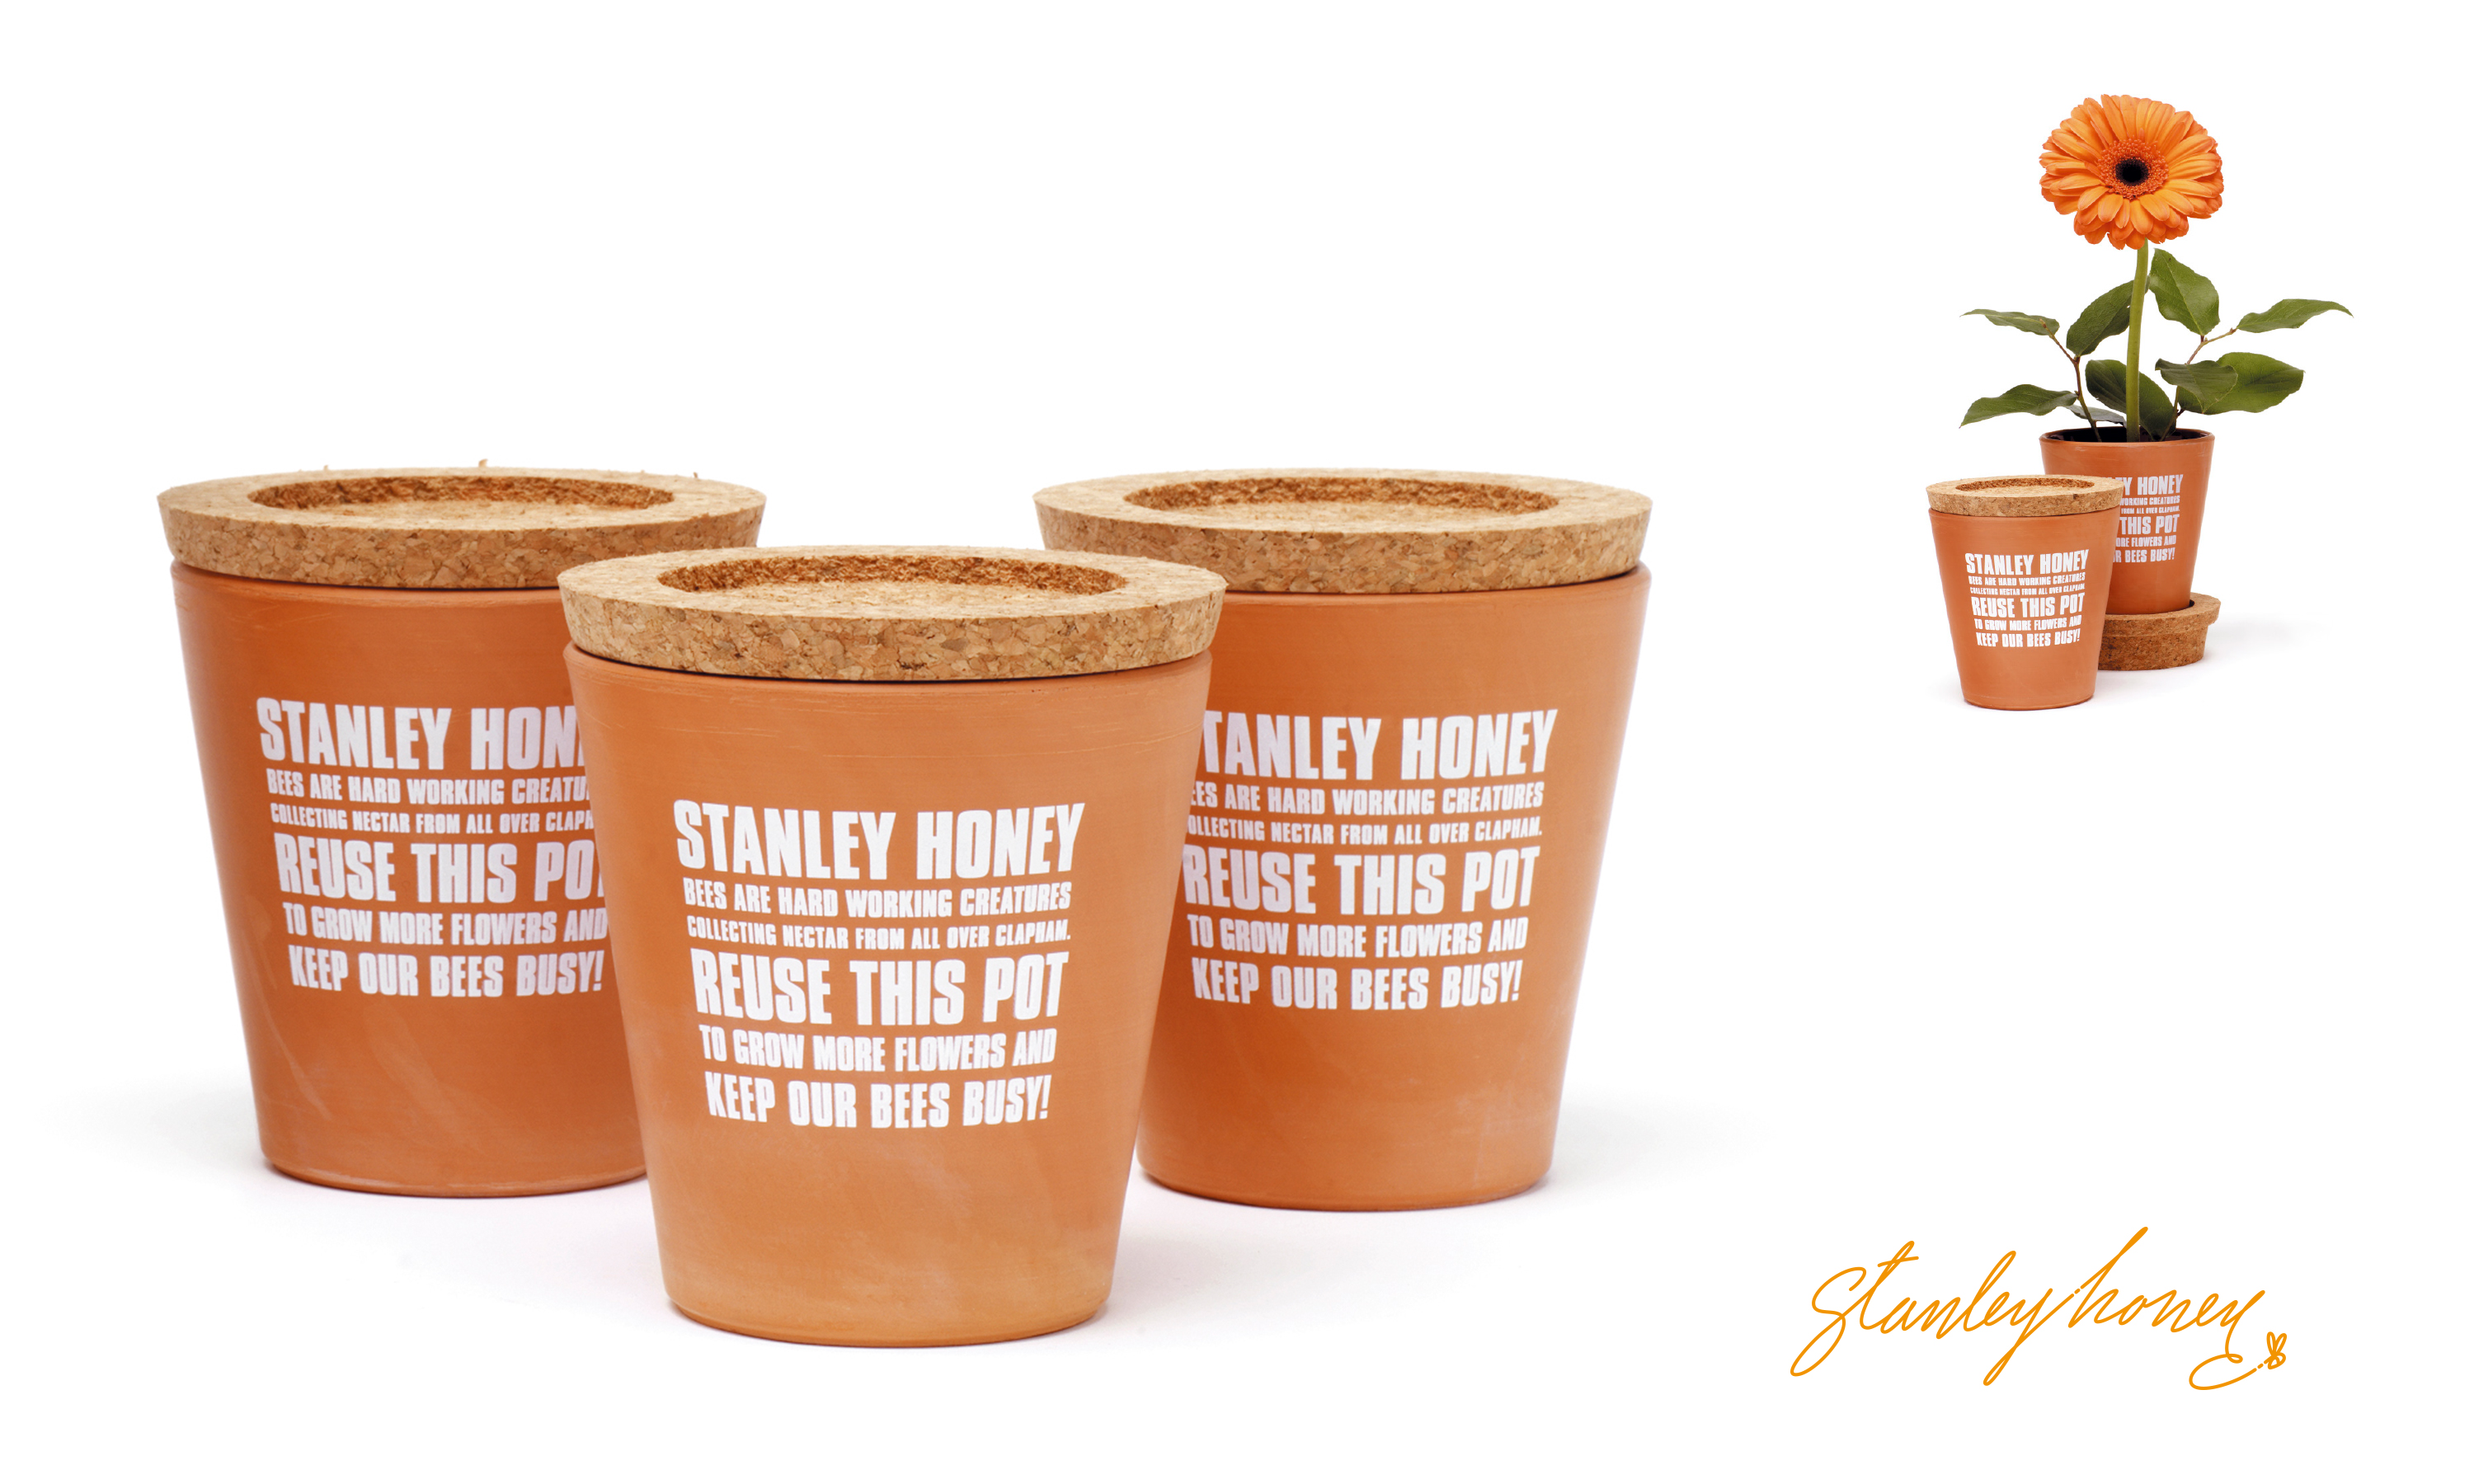 Stanley Honey packaging designed by Dana Robertson featured in A Smile In The Mind